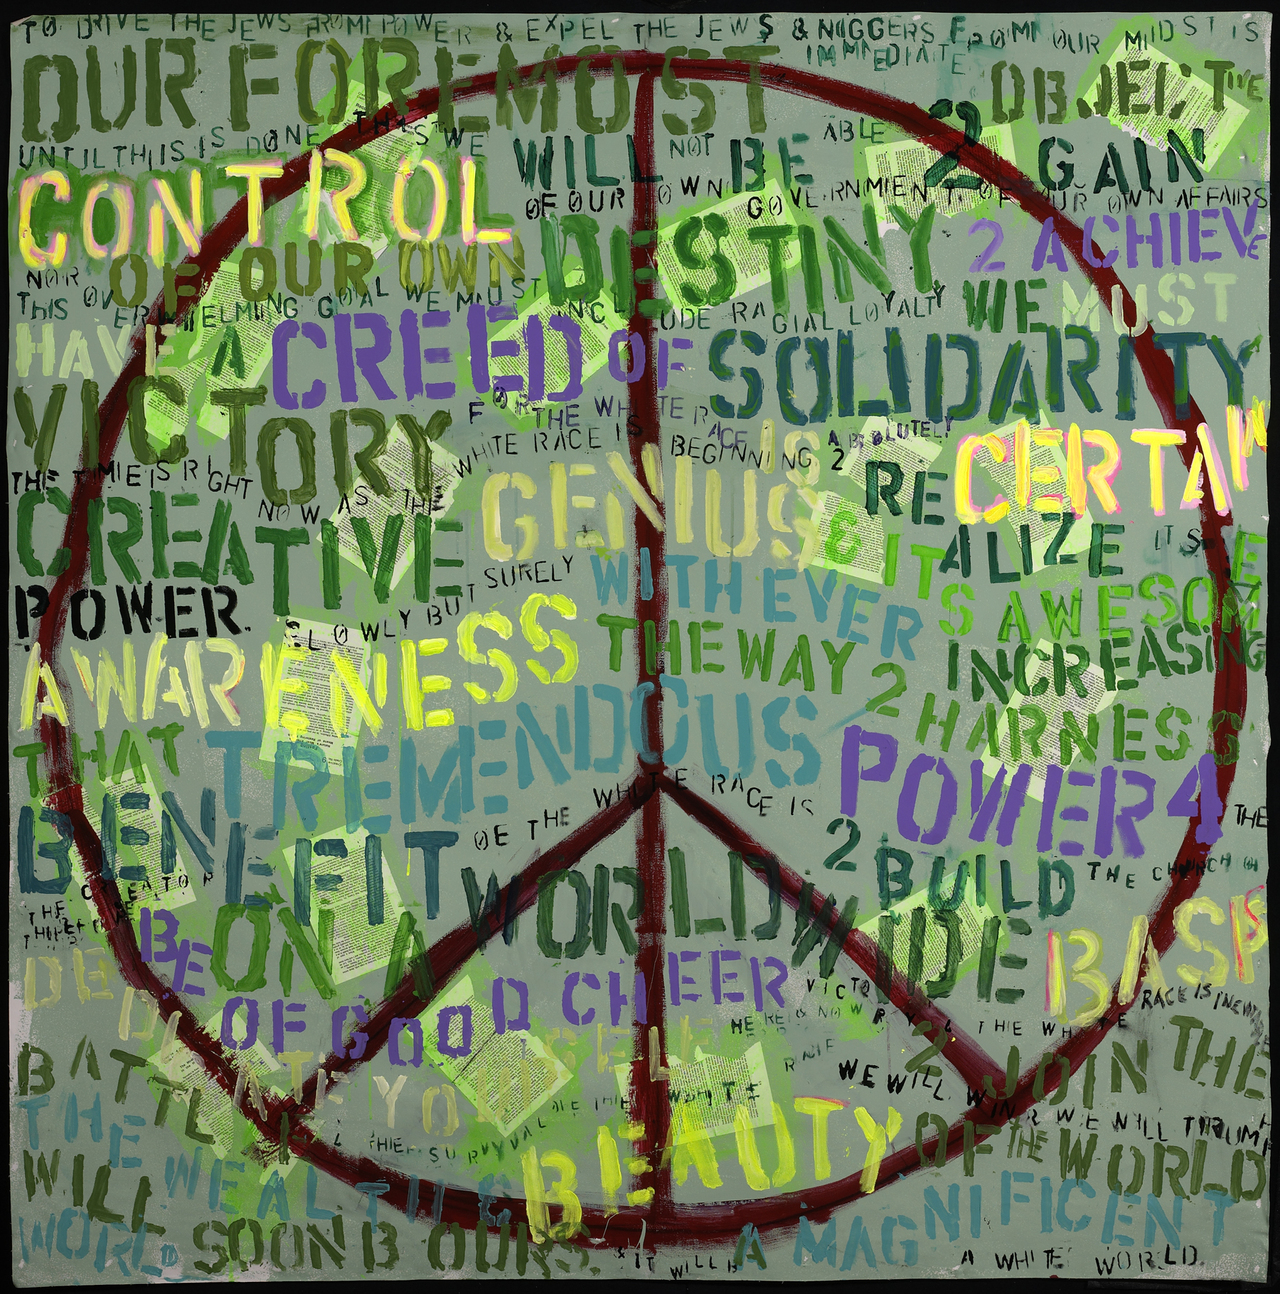 Painting is a brown peace sign on a green background with words like "awareness, tremendous, power5 and destiny" written across it with stencils.